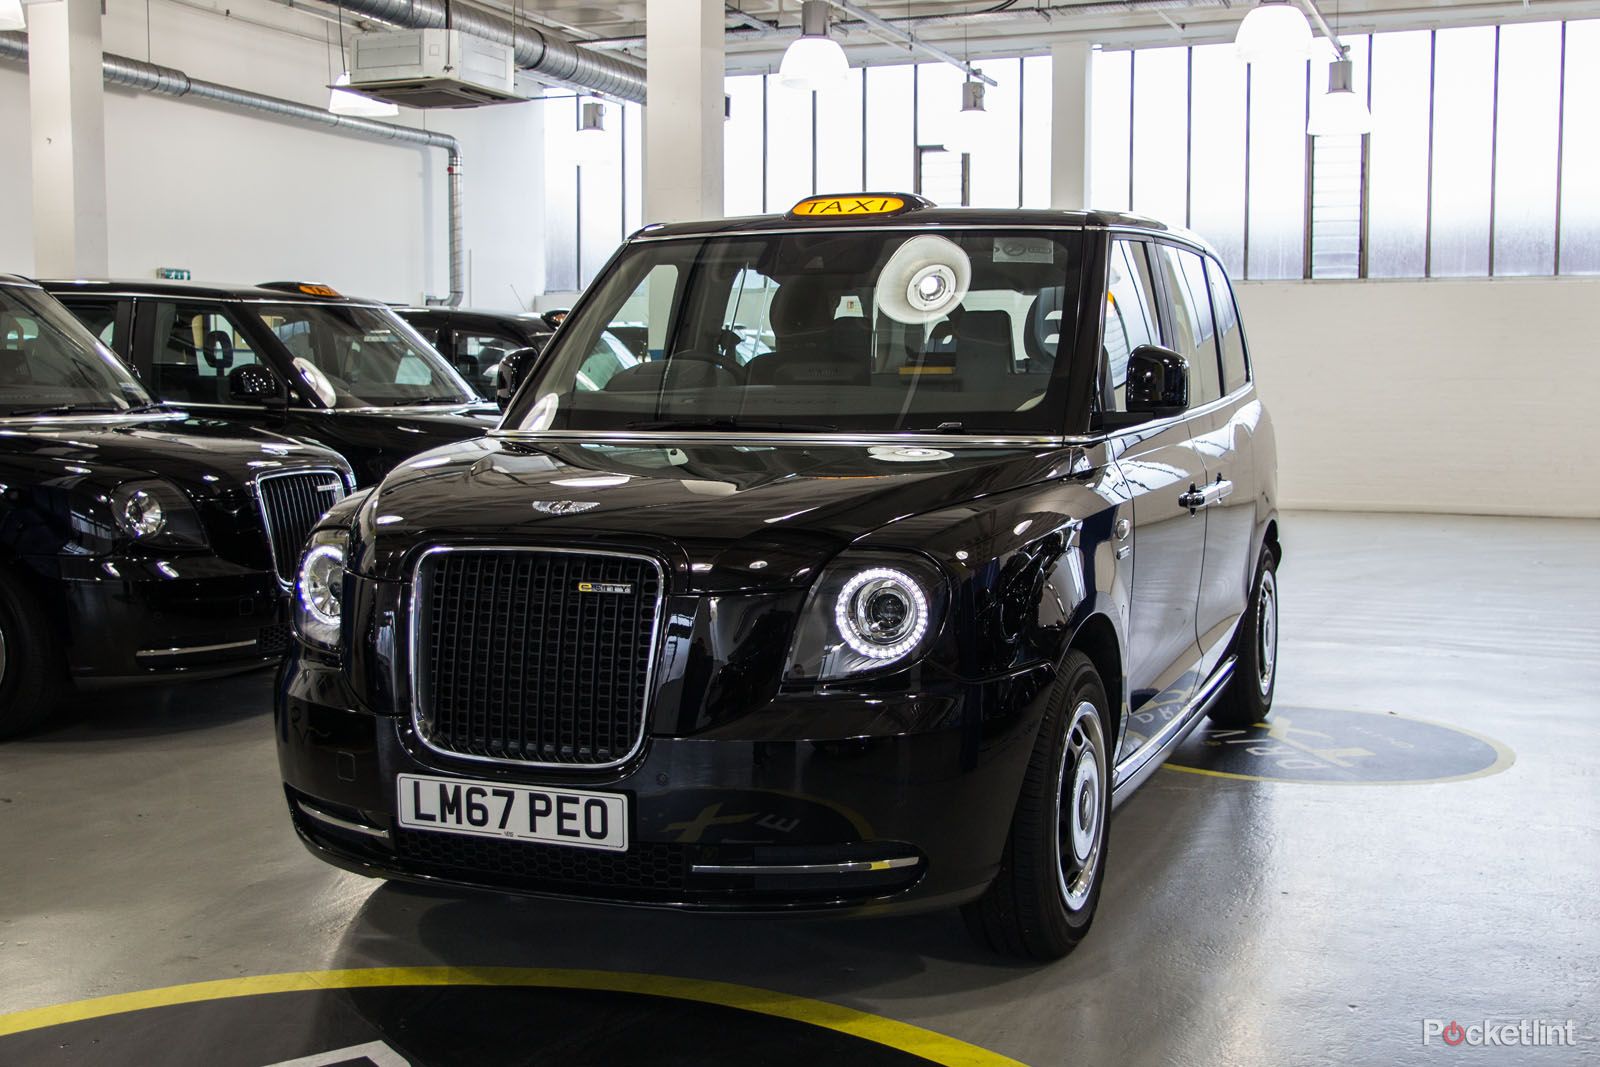 Electric taxis could be charged wirelessly in future UK trial underway image 1